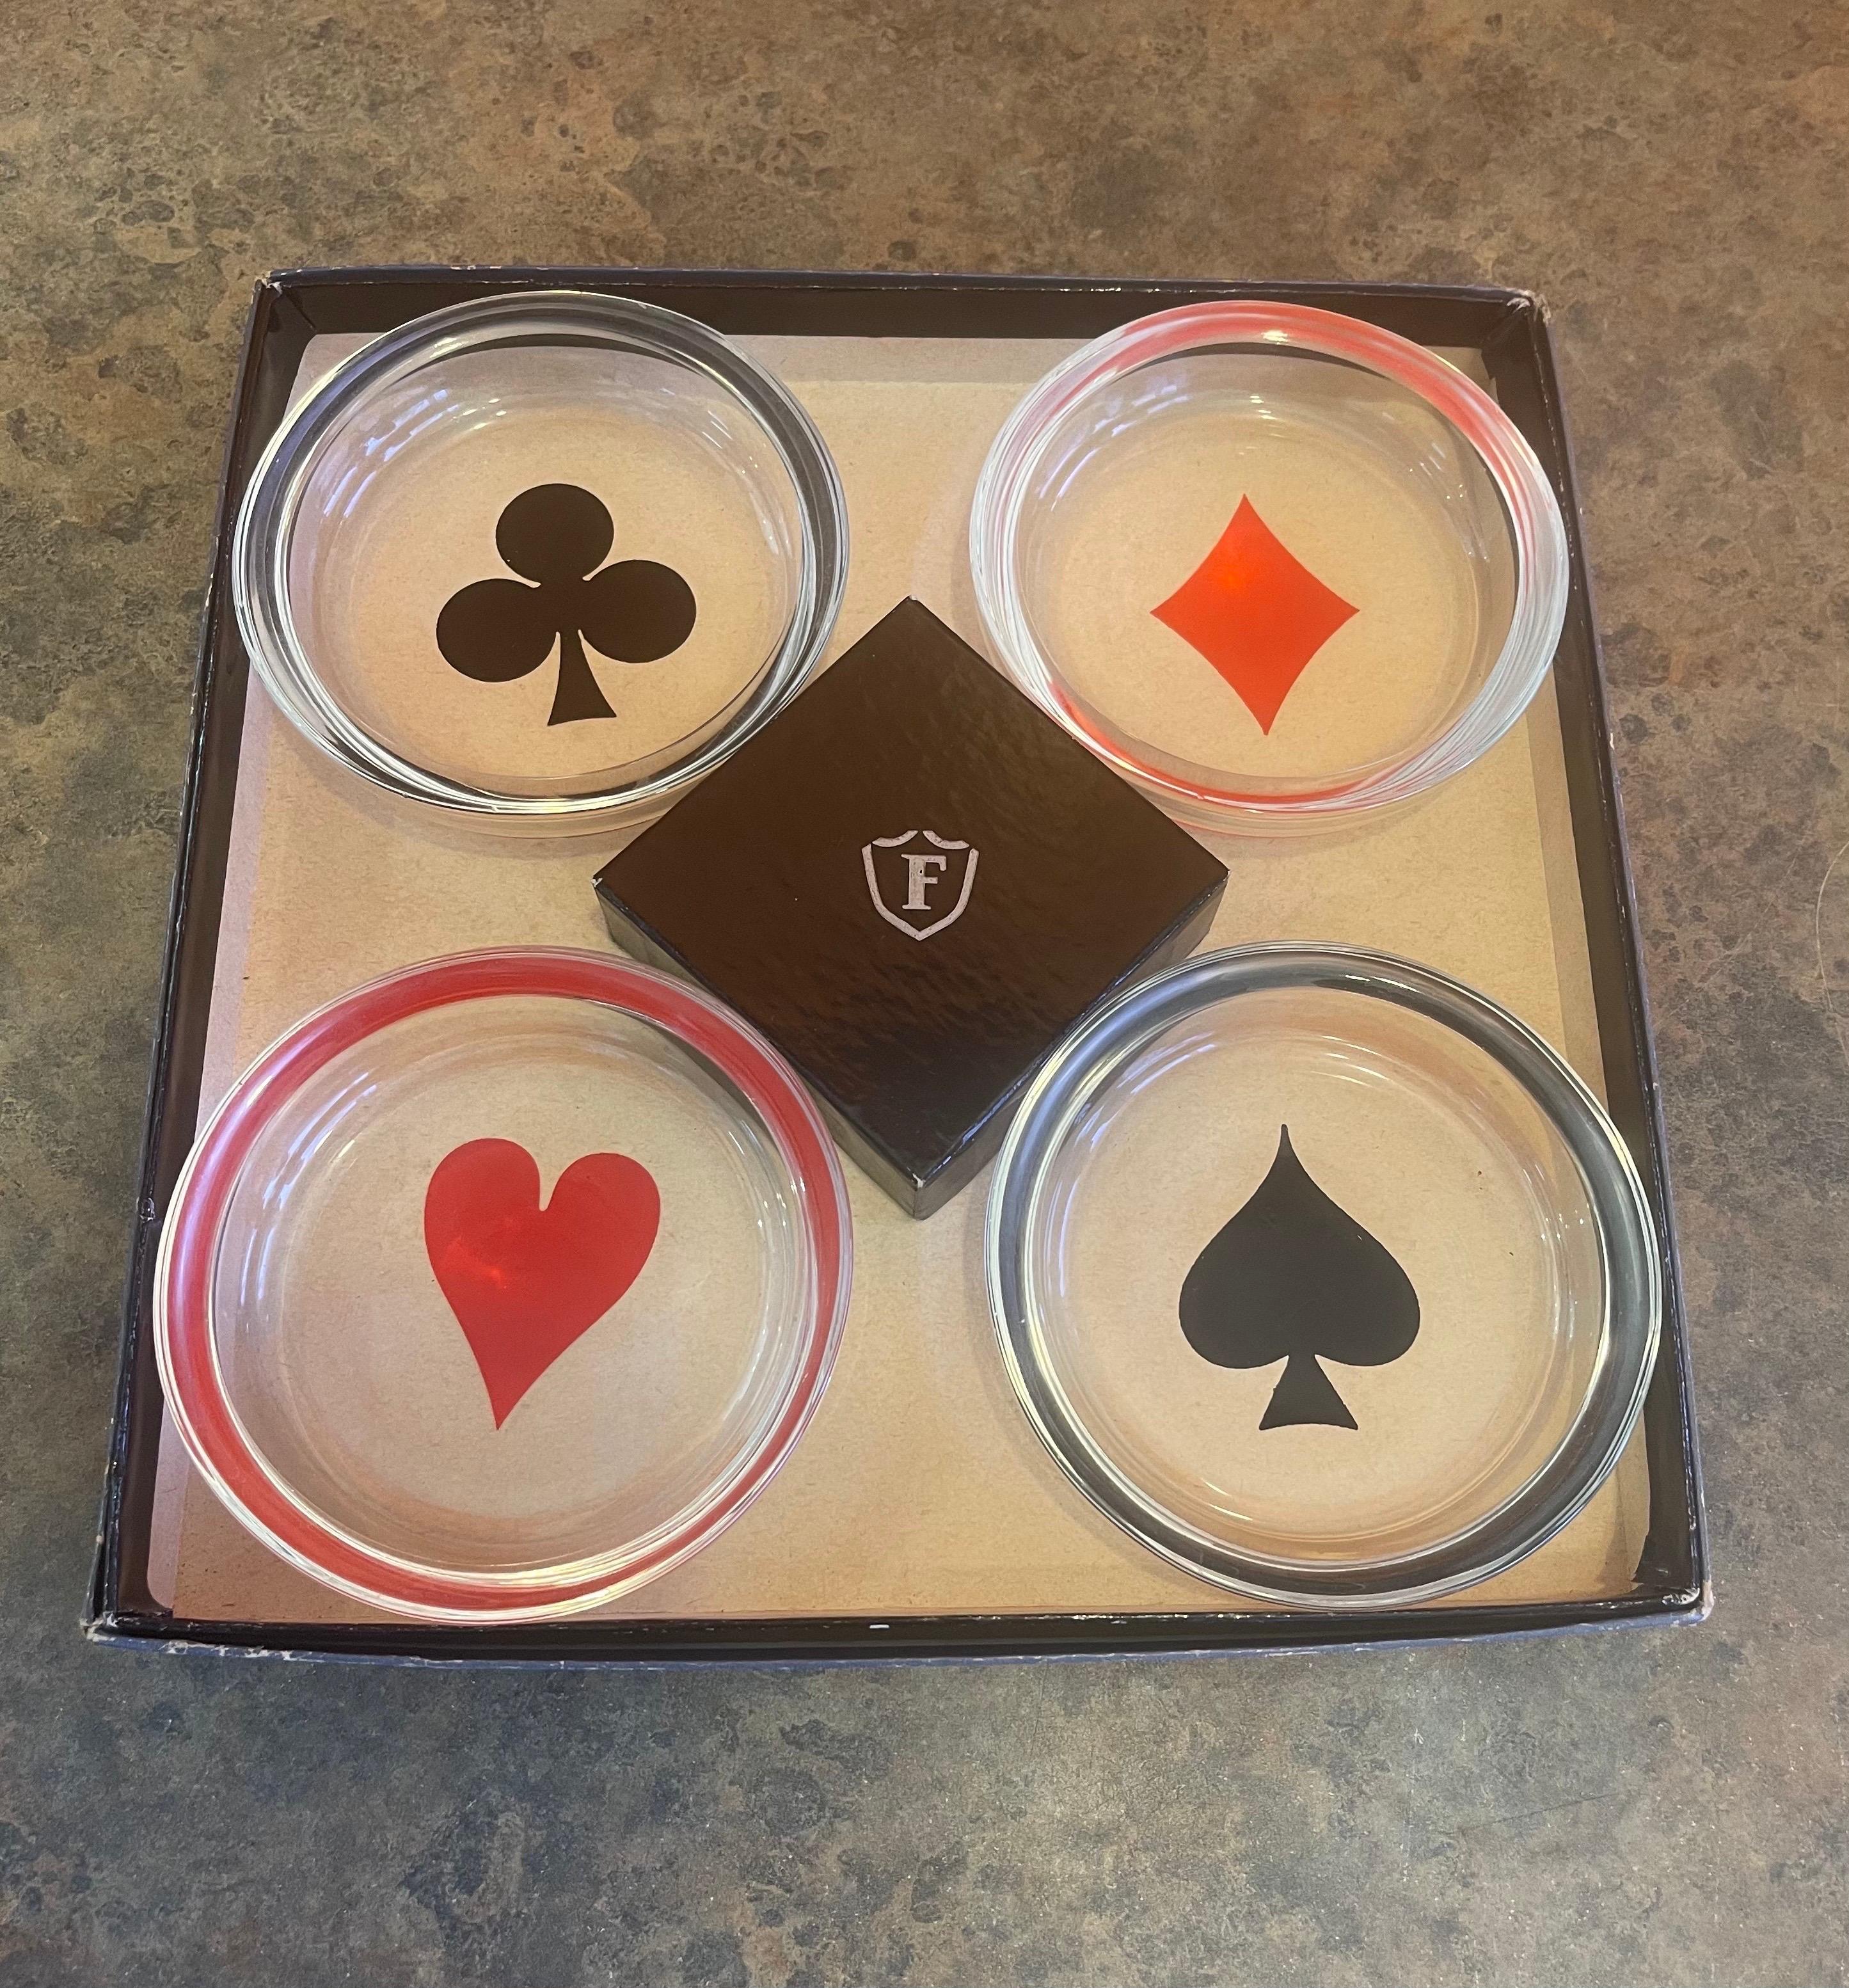 Vintage box set of four MCM poker / card suits themed glass coasters or ashtrays by Federal Glass Co, circa 1960s. The set comes with the original box and includes four round clear coasters that are 3.75